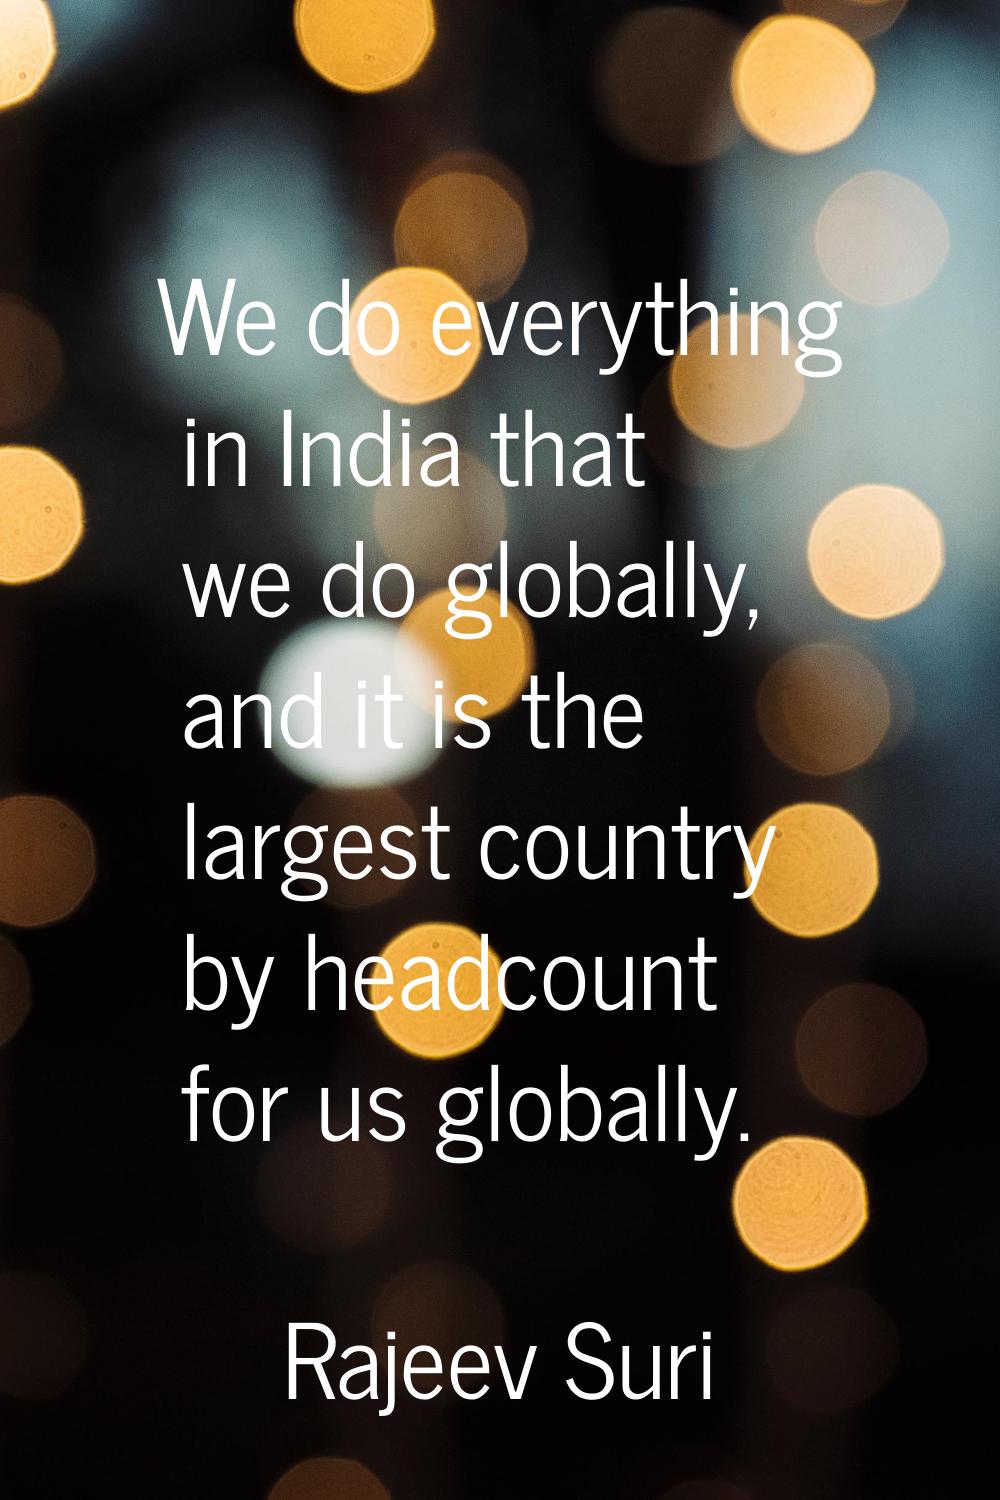 We do everything in India that we do globally, and it is the largest country by headcount for us gl